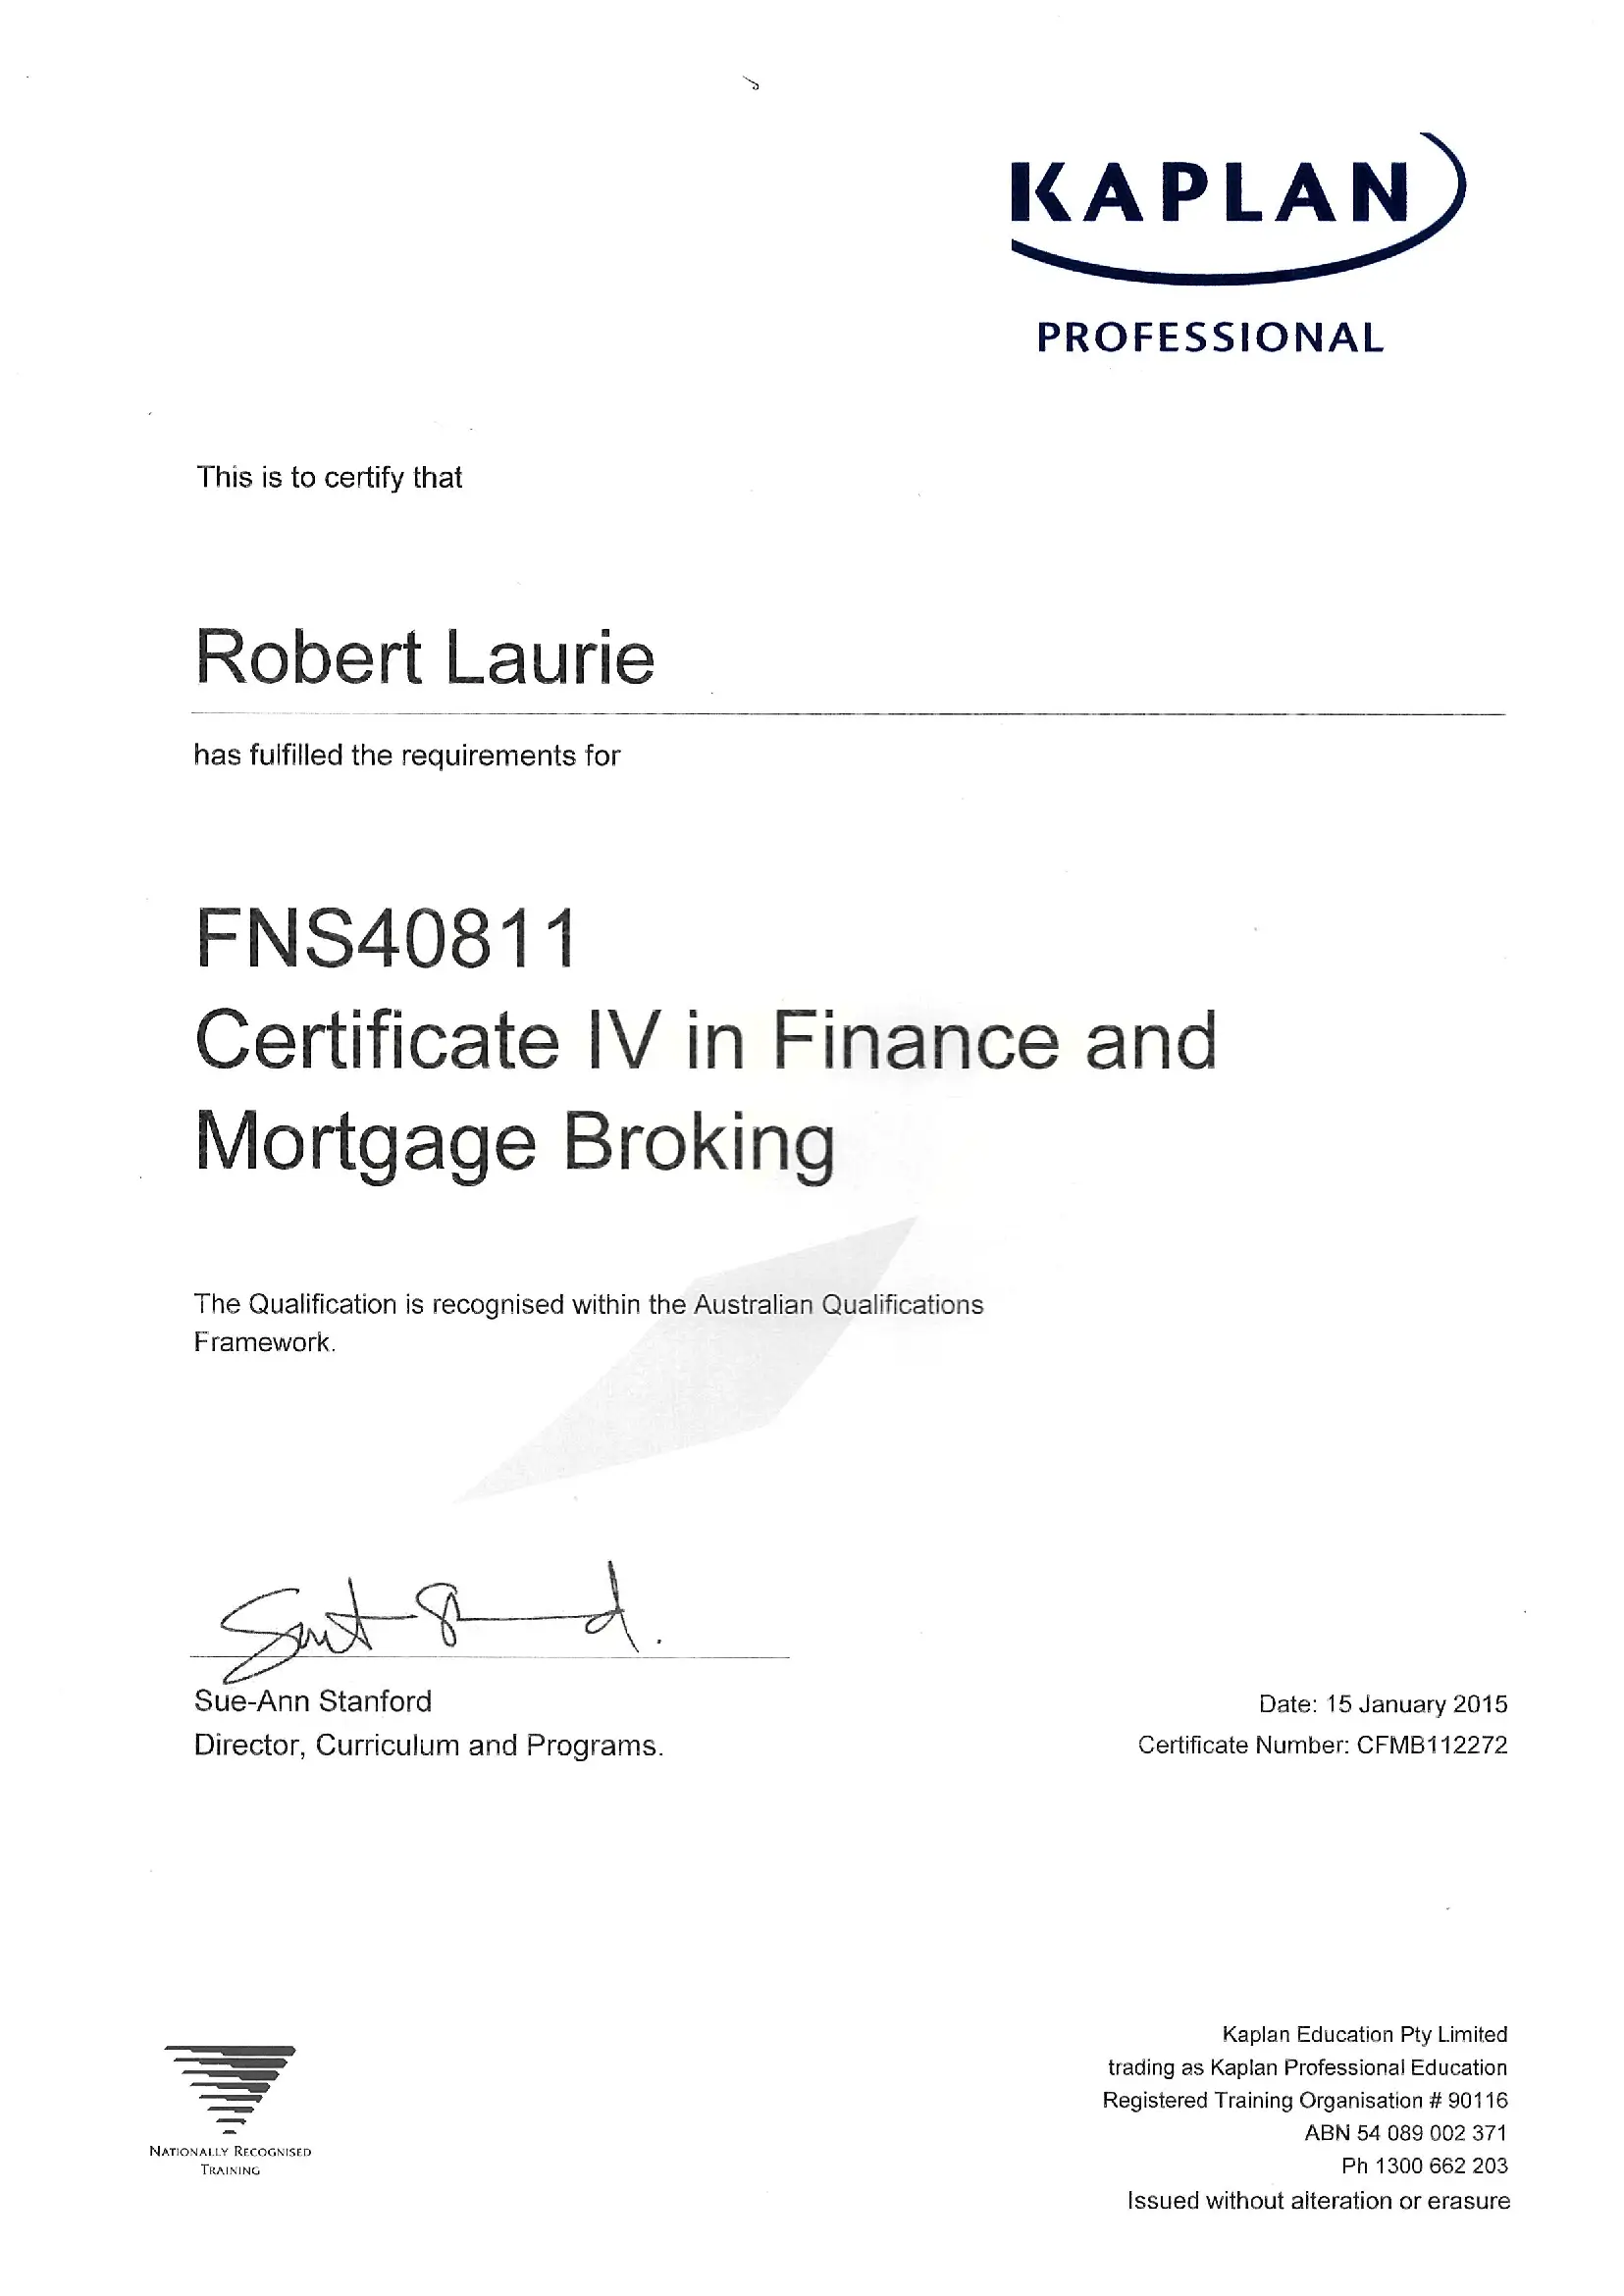 Certificate IV in Finance and Mortgage Broking Certificate.